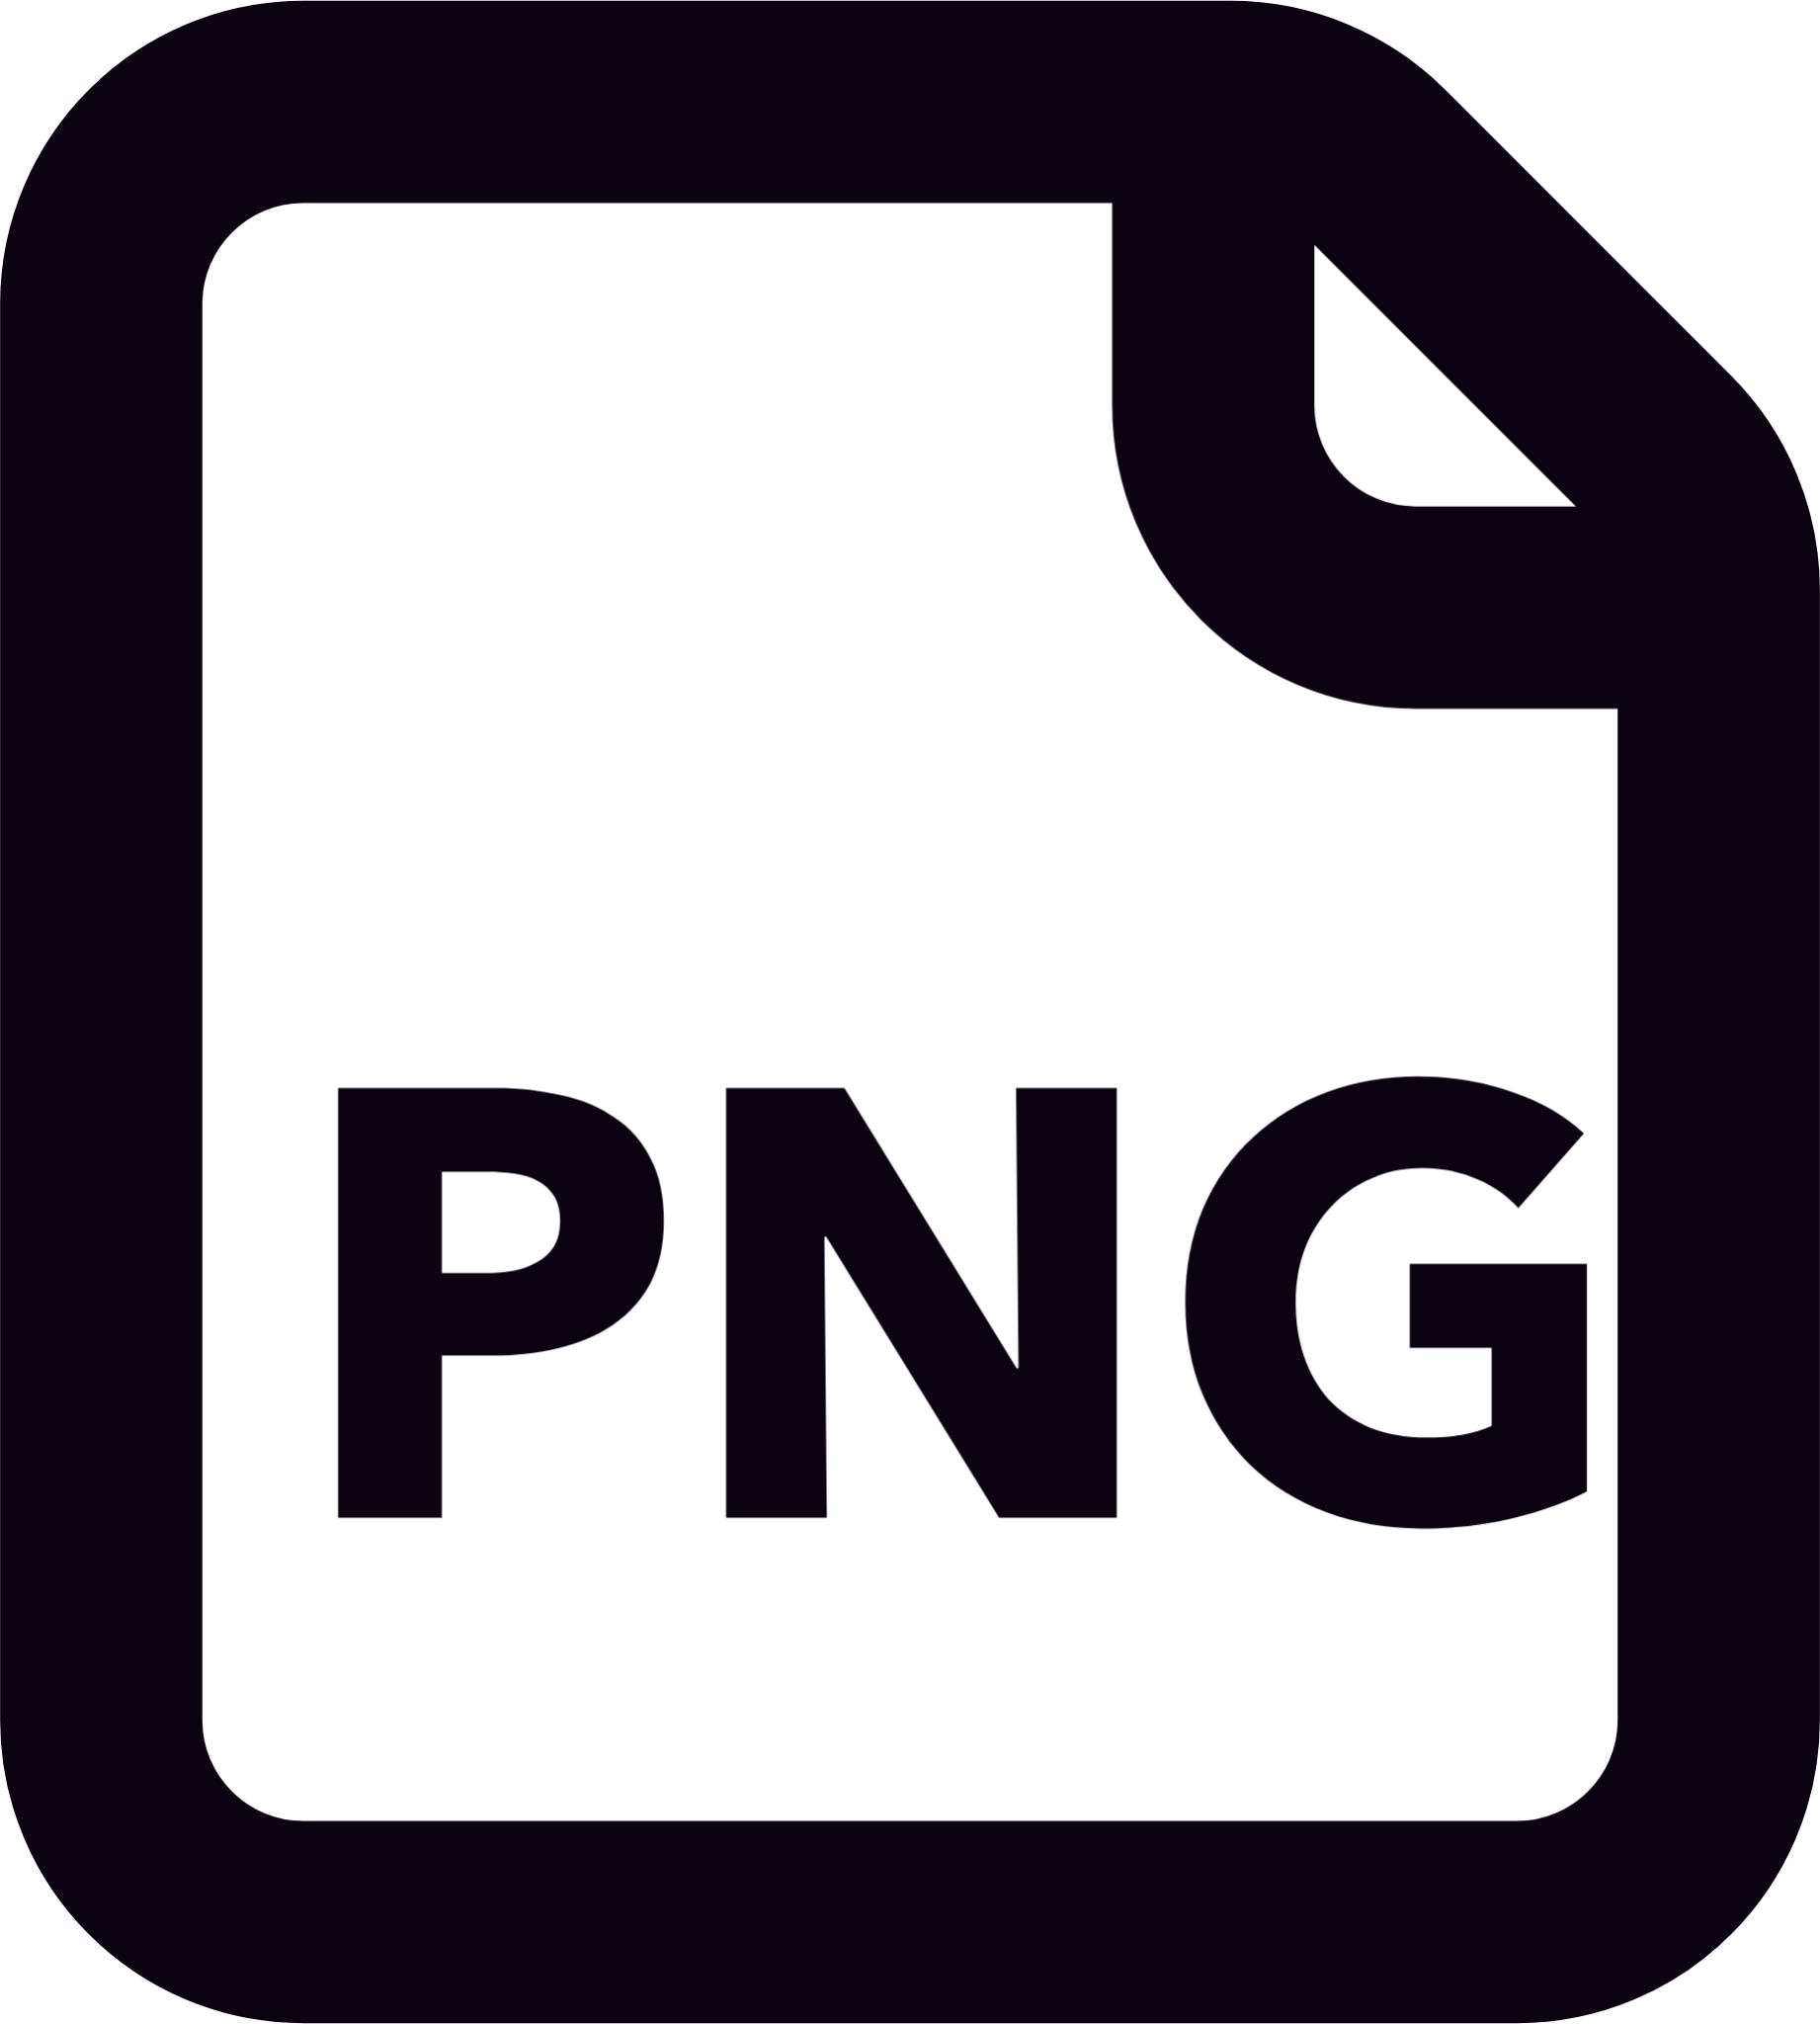 file png icon